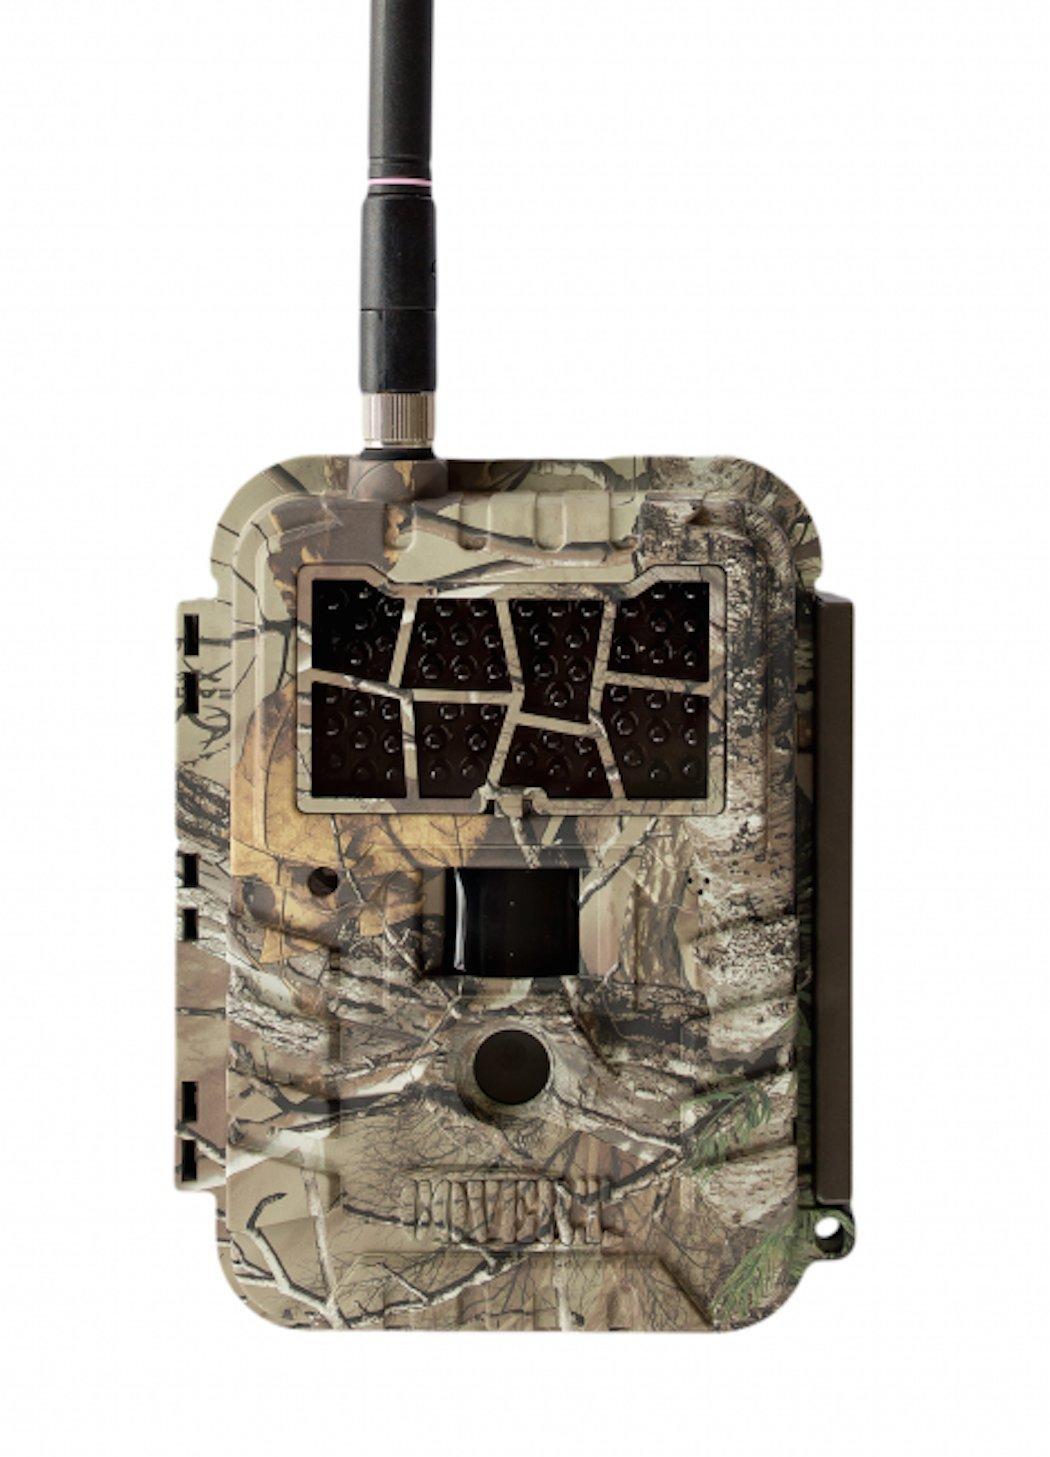 Verizon Certified Blackhawk Wireless Realtree 60 Invisible IR HD Camera by Covert Scouting Cameras